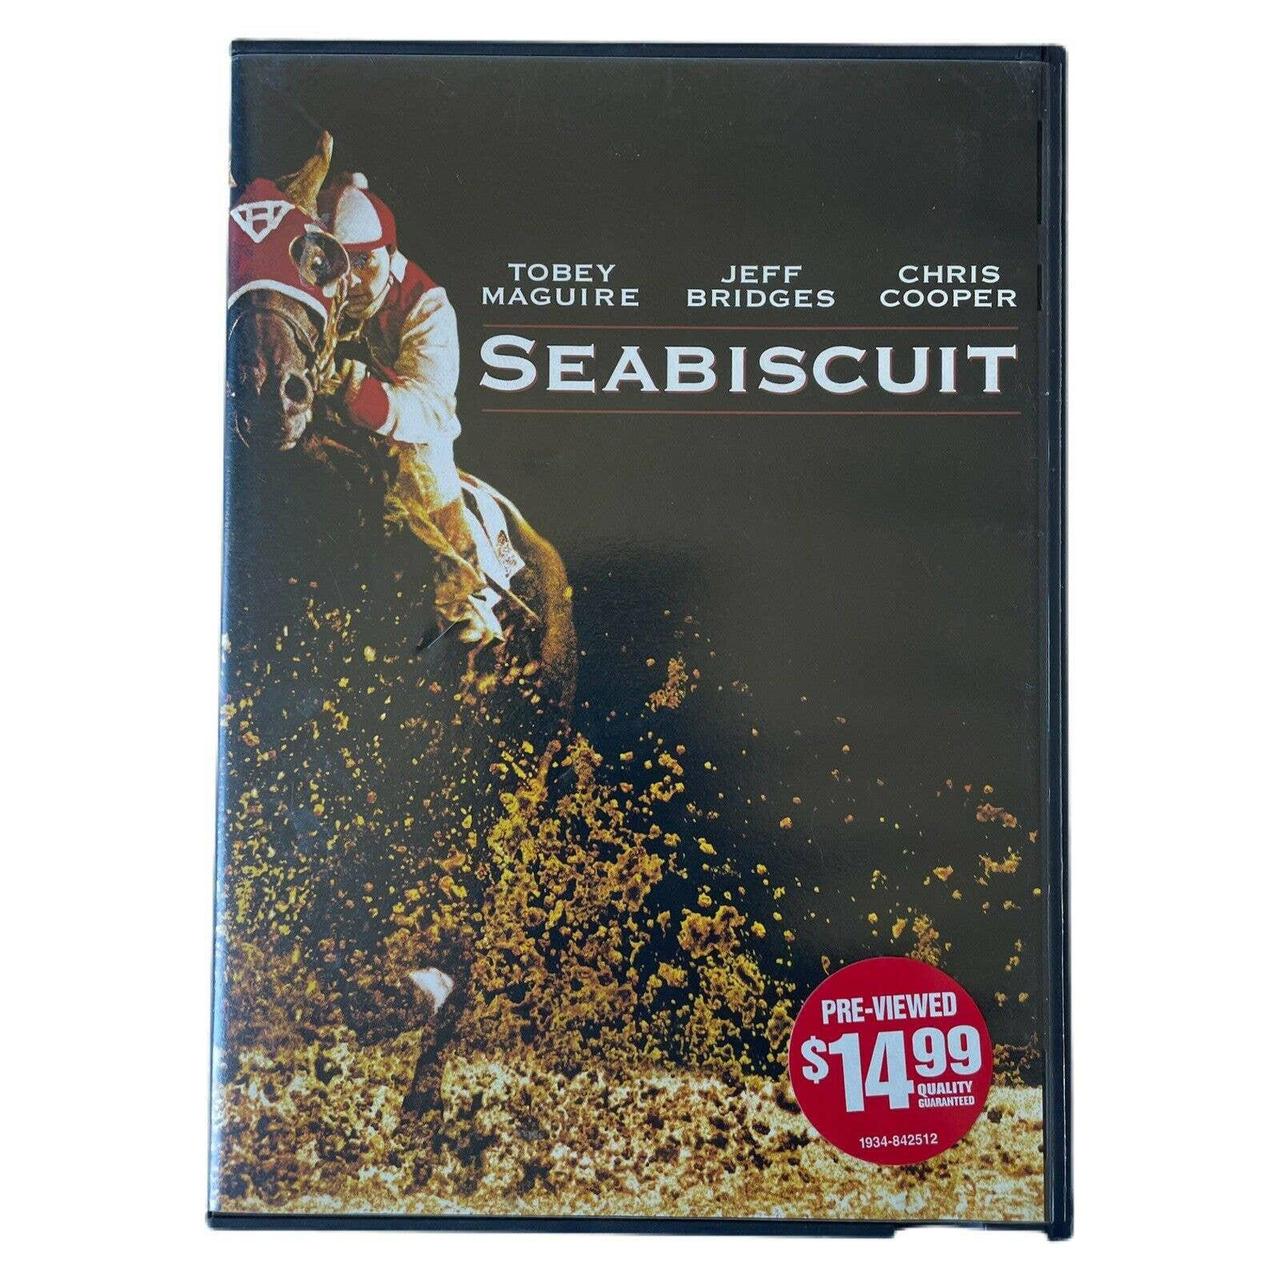 Product Image 1 - Seabiscuit (DVD, 2003). Ships Media